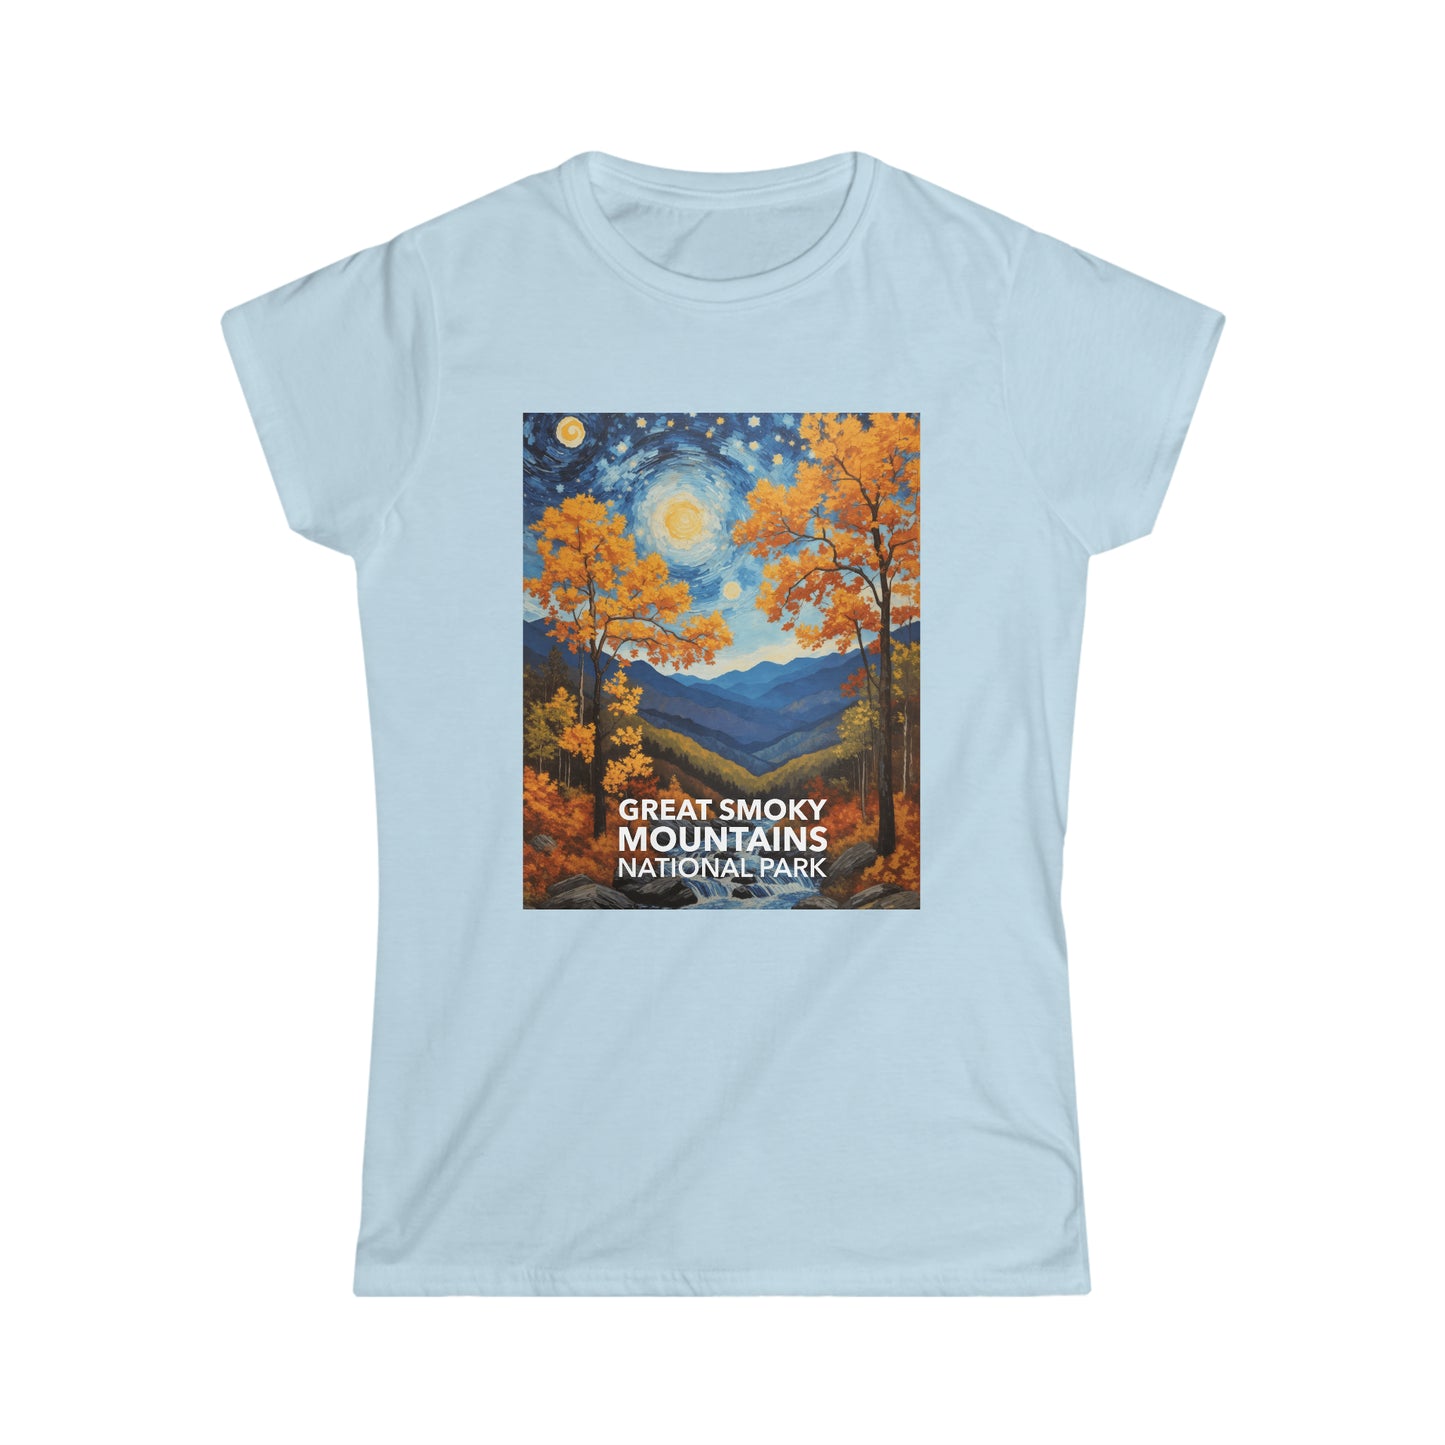 Great Smoky Mountains National Park T-Shirt - Women's Starry Night